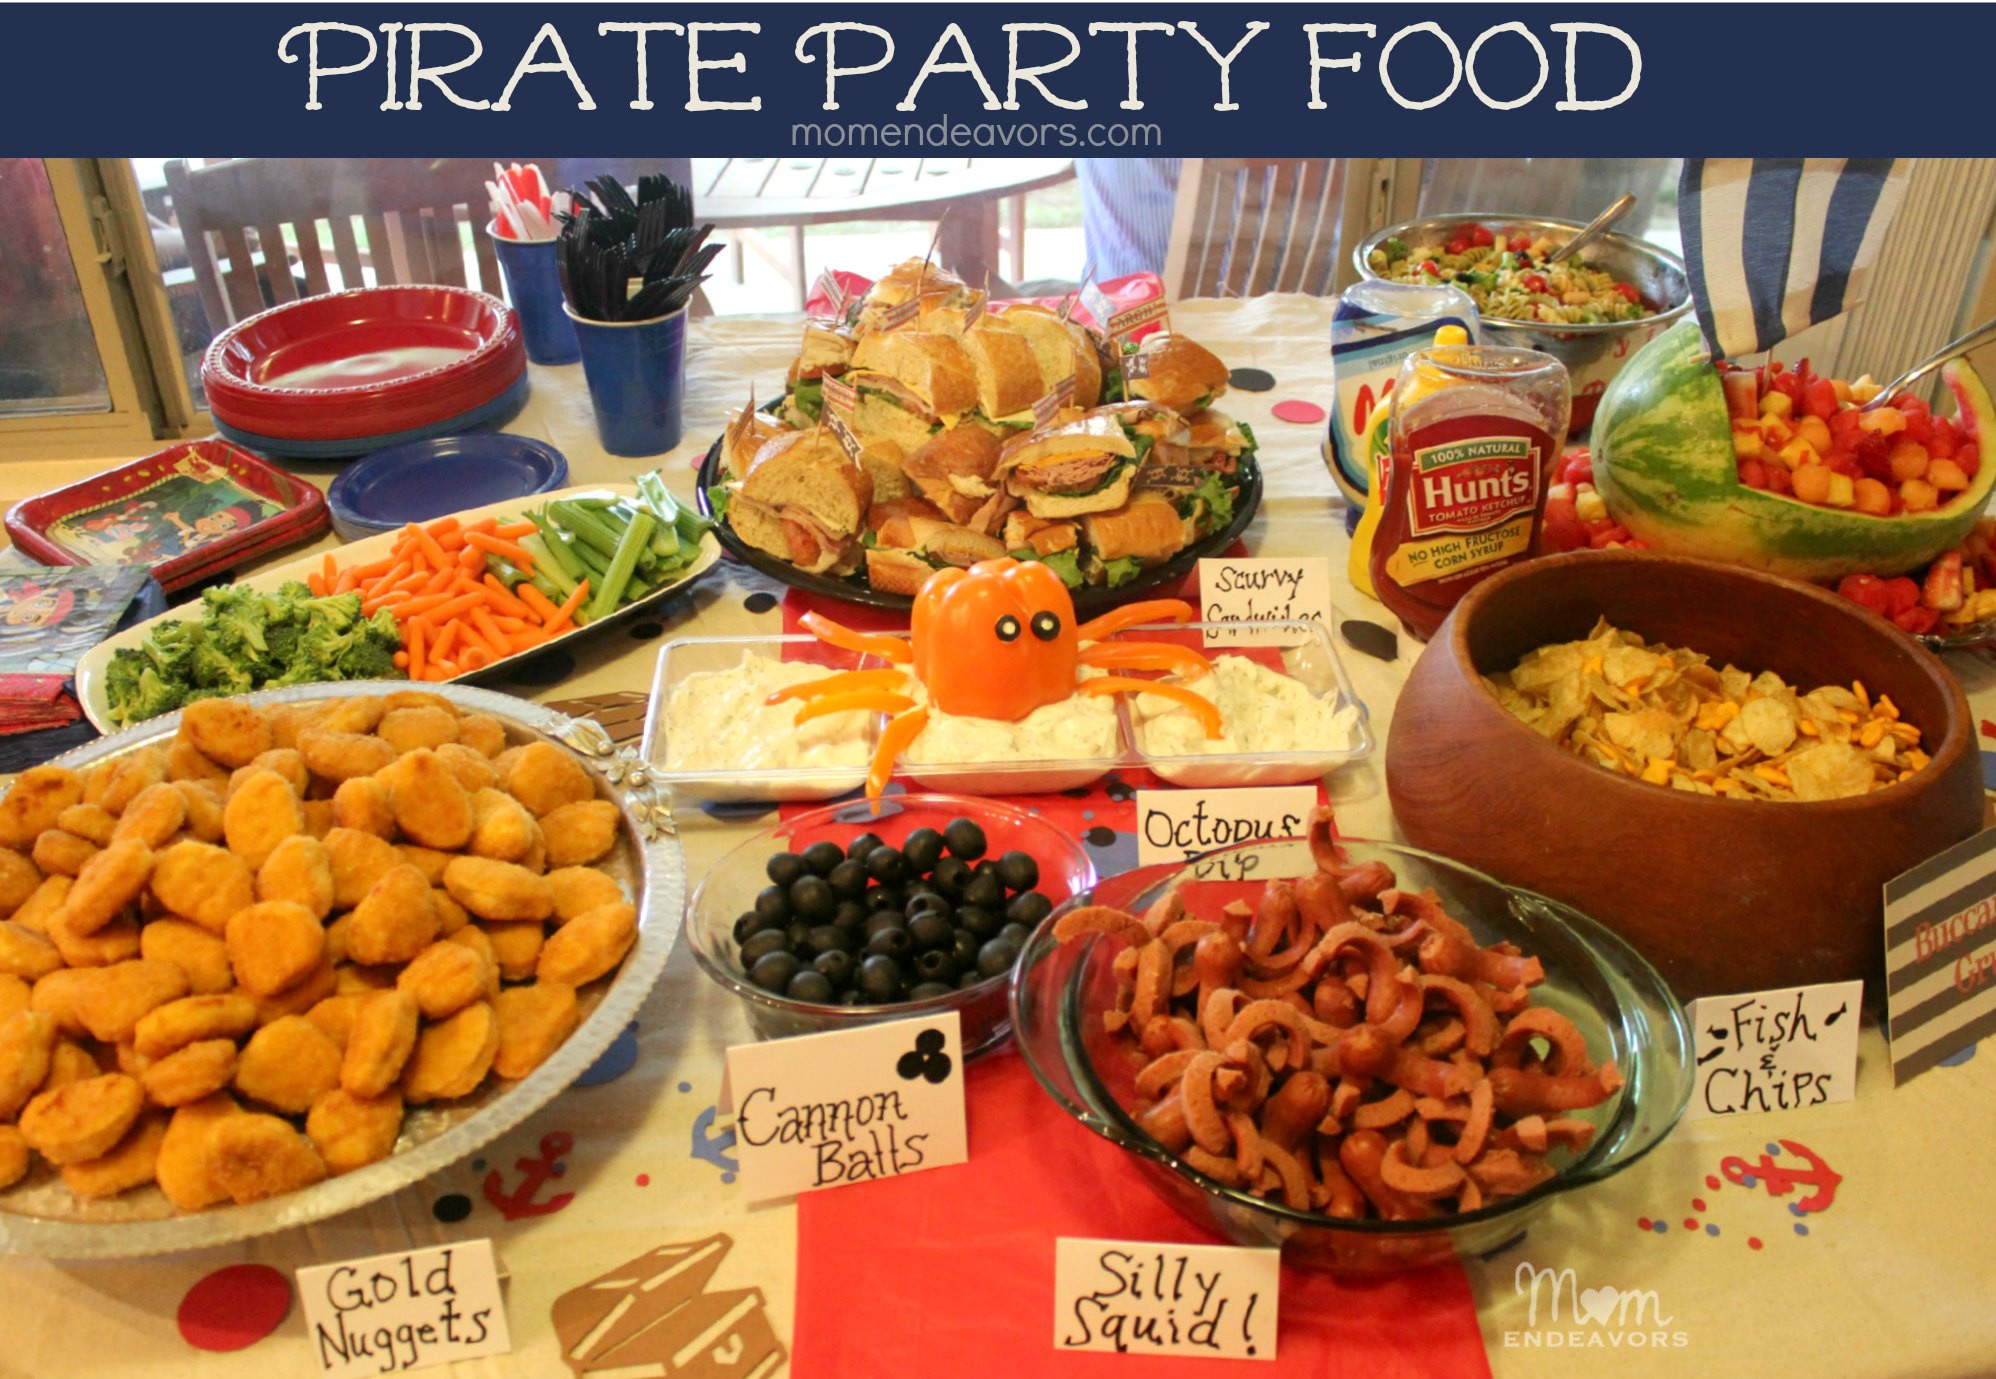 Birthday Party Food Menu
 Jake and the Never Land Pirates Birthday Party Food